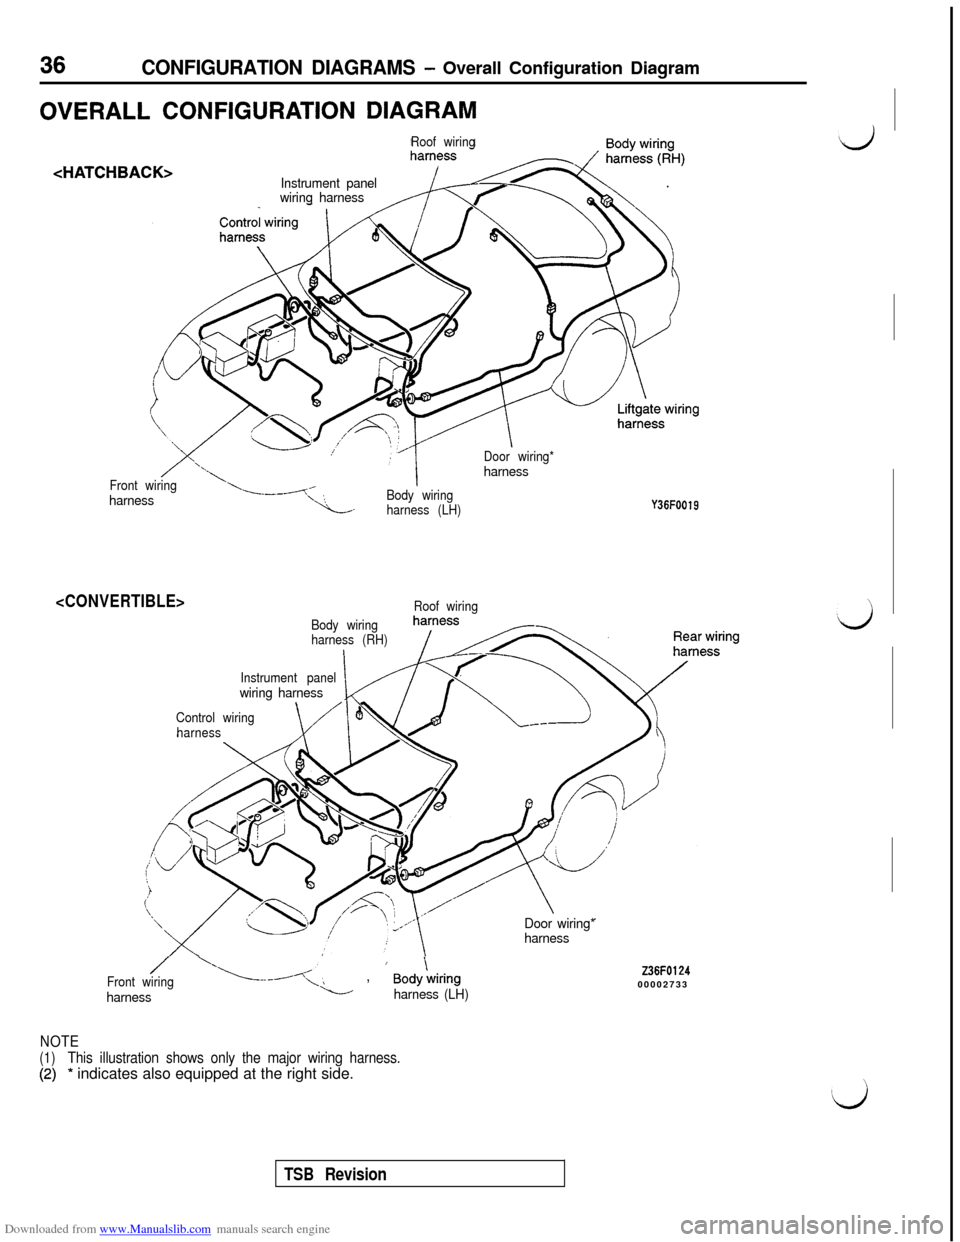 MITSUBISHI 3000GT 1996 2.G Workshop Manual Downloaded from www.Manualslib.com manuals search engine 36CONFIGURATION DIAGRAMS - Overall Configuration Diagram
OVERALL CONFIGURATION DIAGRAM
<HAT1
Roof wiring
CHBACK>Instrument panel
wiring harness